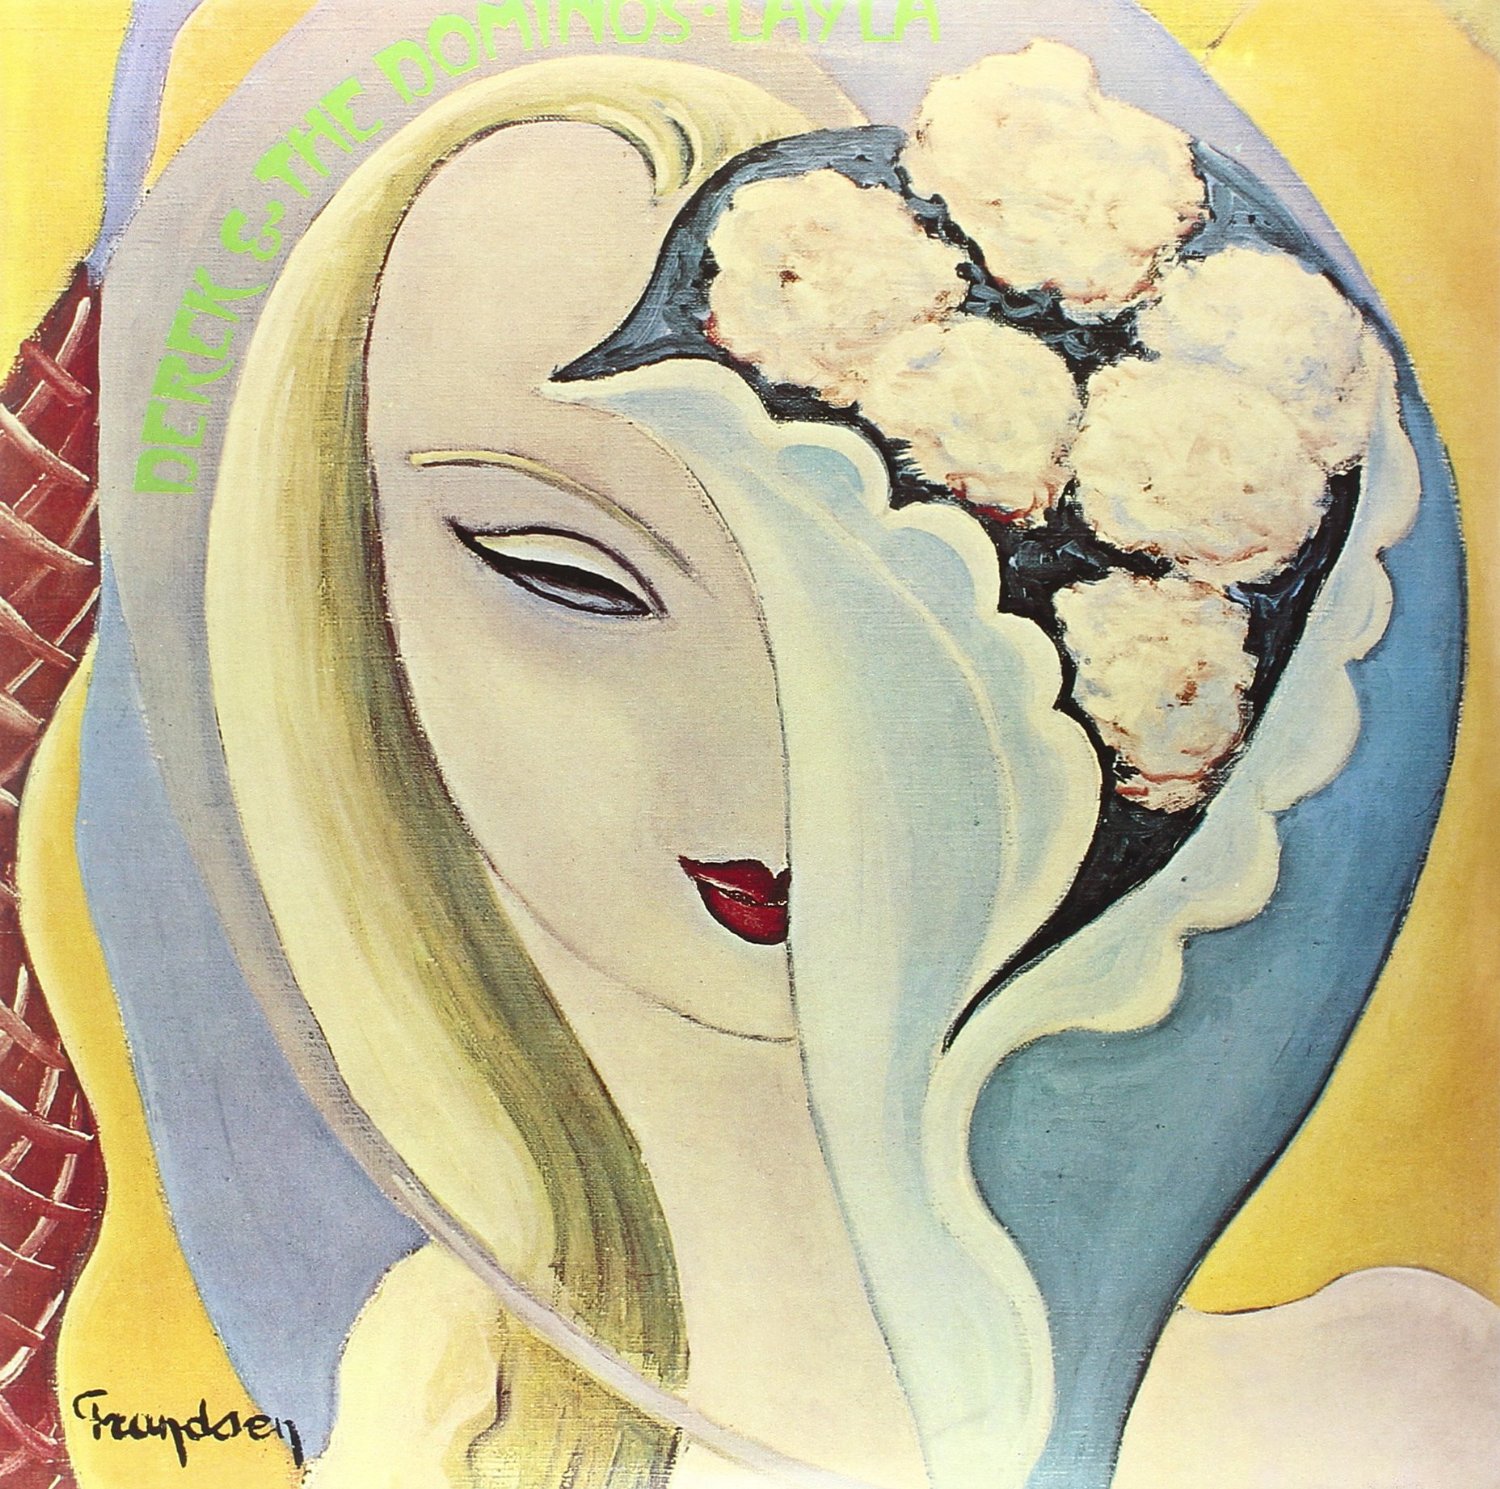 Layla And Other Assorted Love Songs - Vinyl | Derek & The Dominos